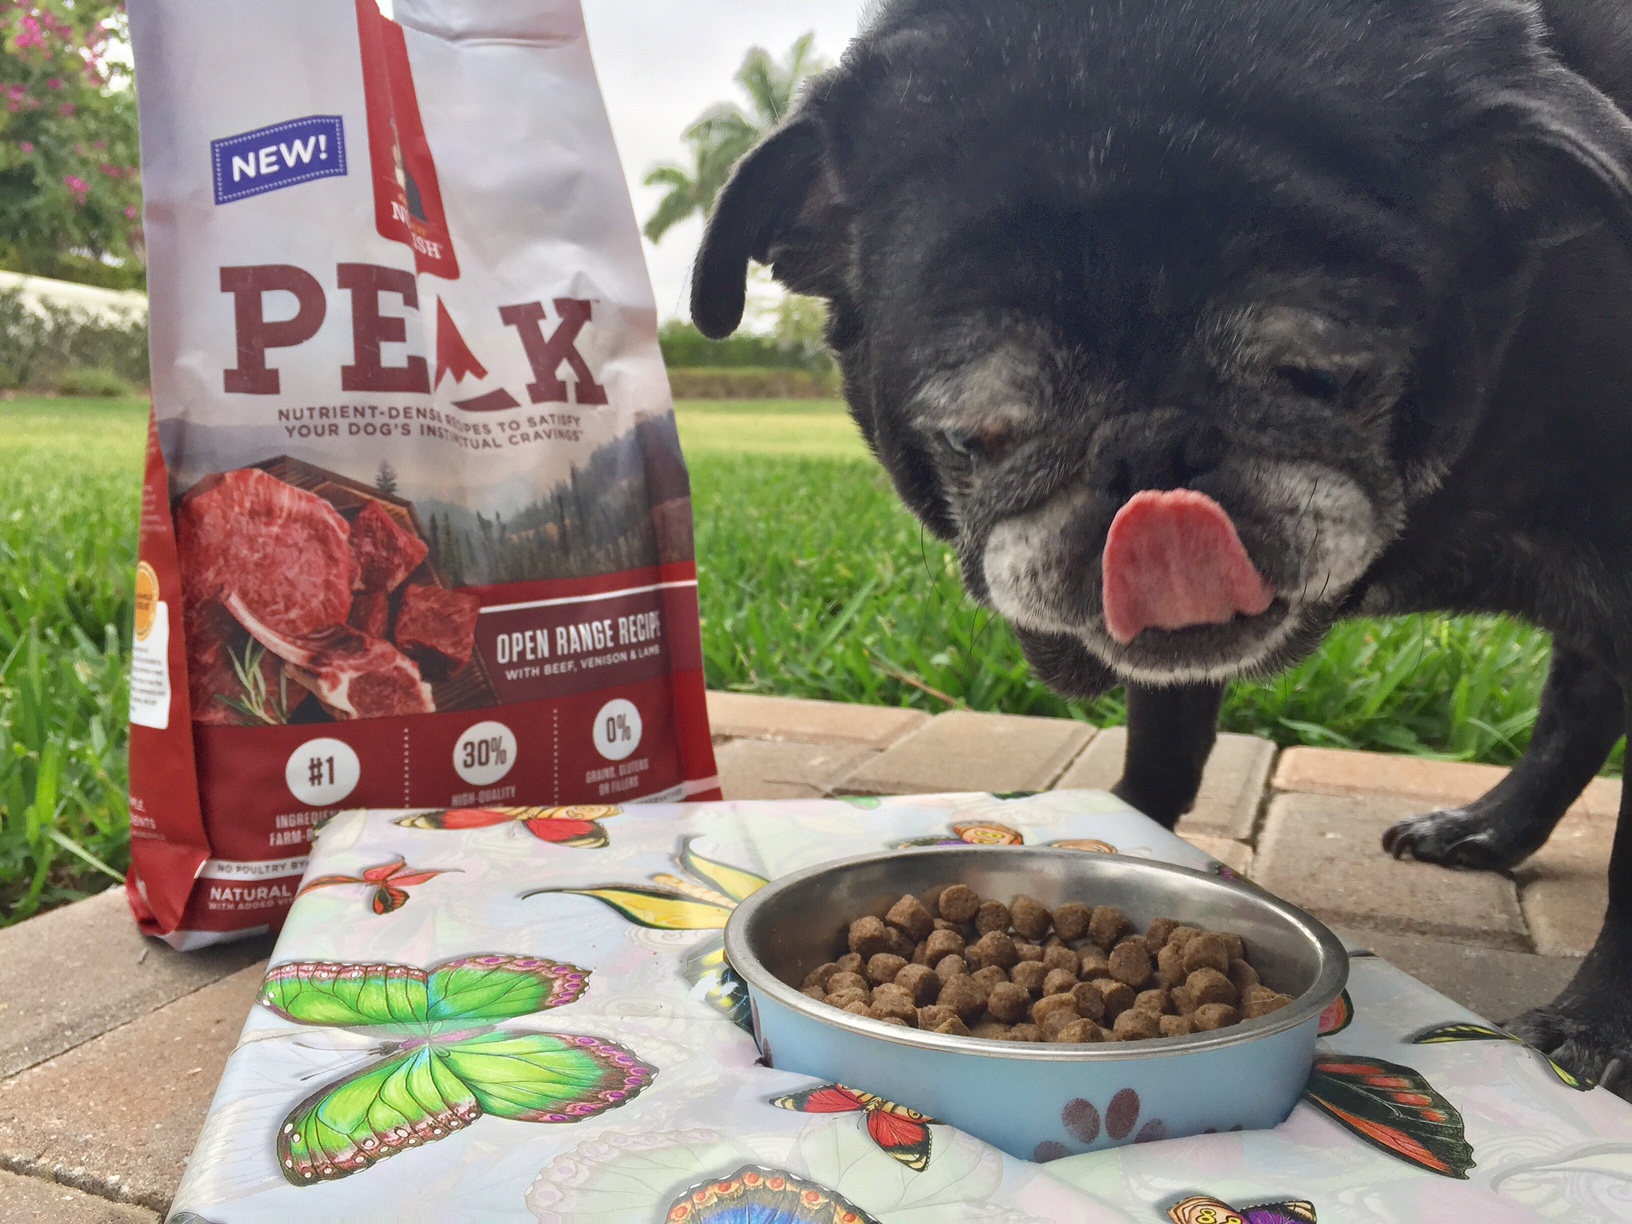 Every family member desrves delicious and nutritious food. Introducing the new Nutrish PEAK Recipe to our dog inspired this Lamb meatball recipe for the family | Rachel Ray's Nutrish PEAK Open Range Recipe | #MyNutrishPeak | dog food | lamb recipes